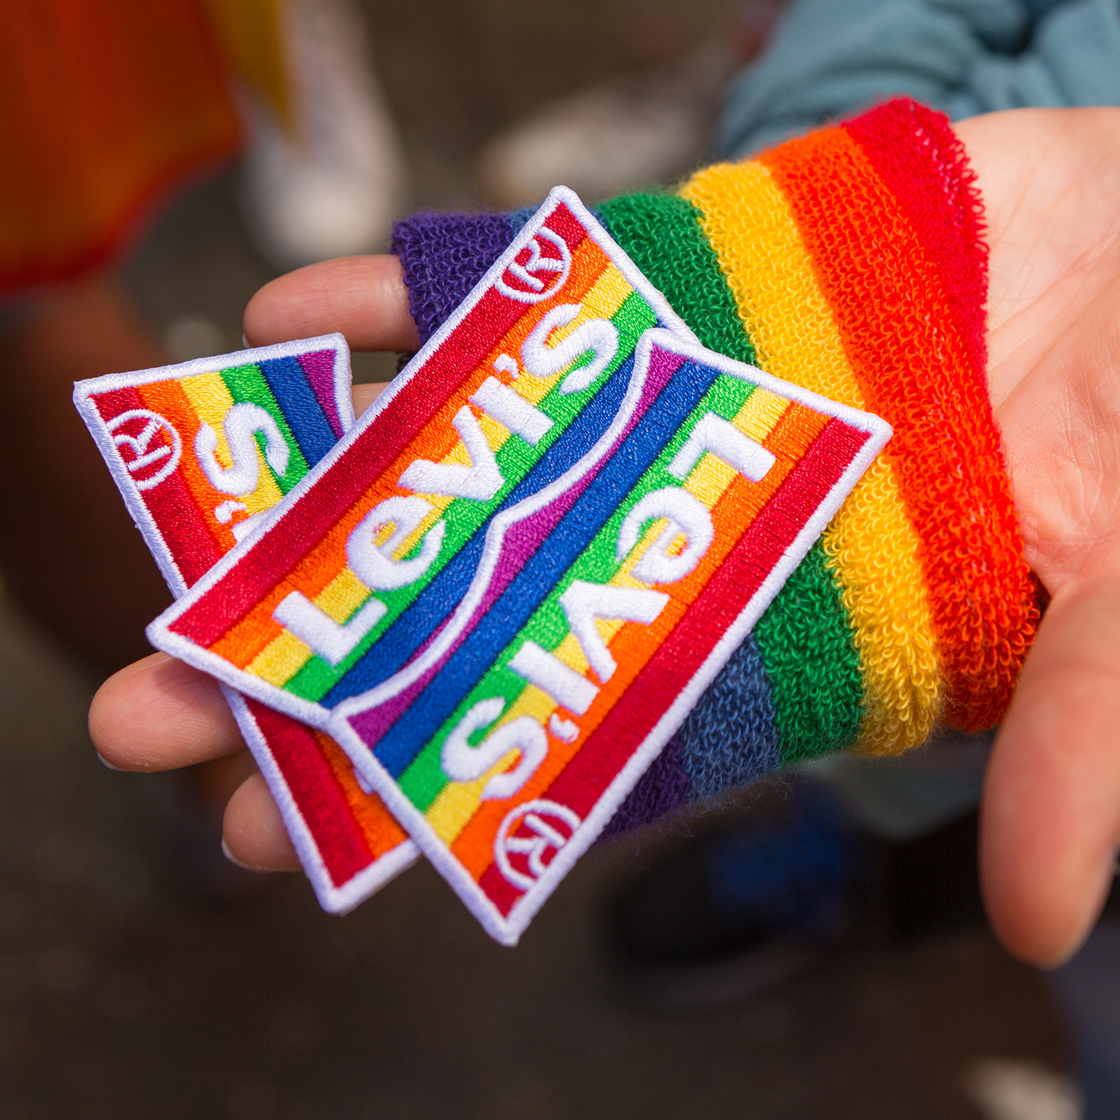 A hand wearing a rainbow fingerless glove holds a handful of Levi's® Pride patches - Rainbow striped patches that are in the shape of the Levi's® batwing logo and read 